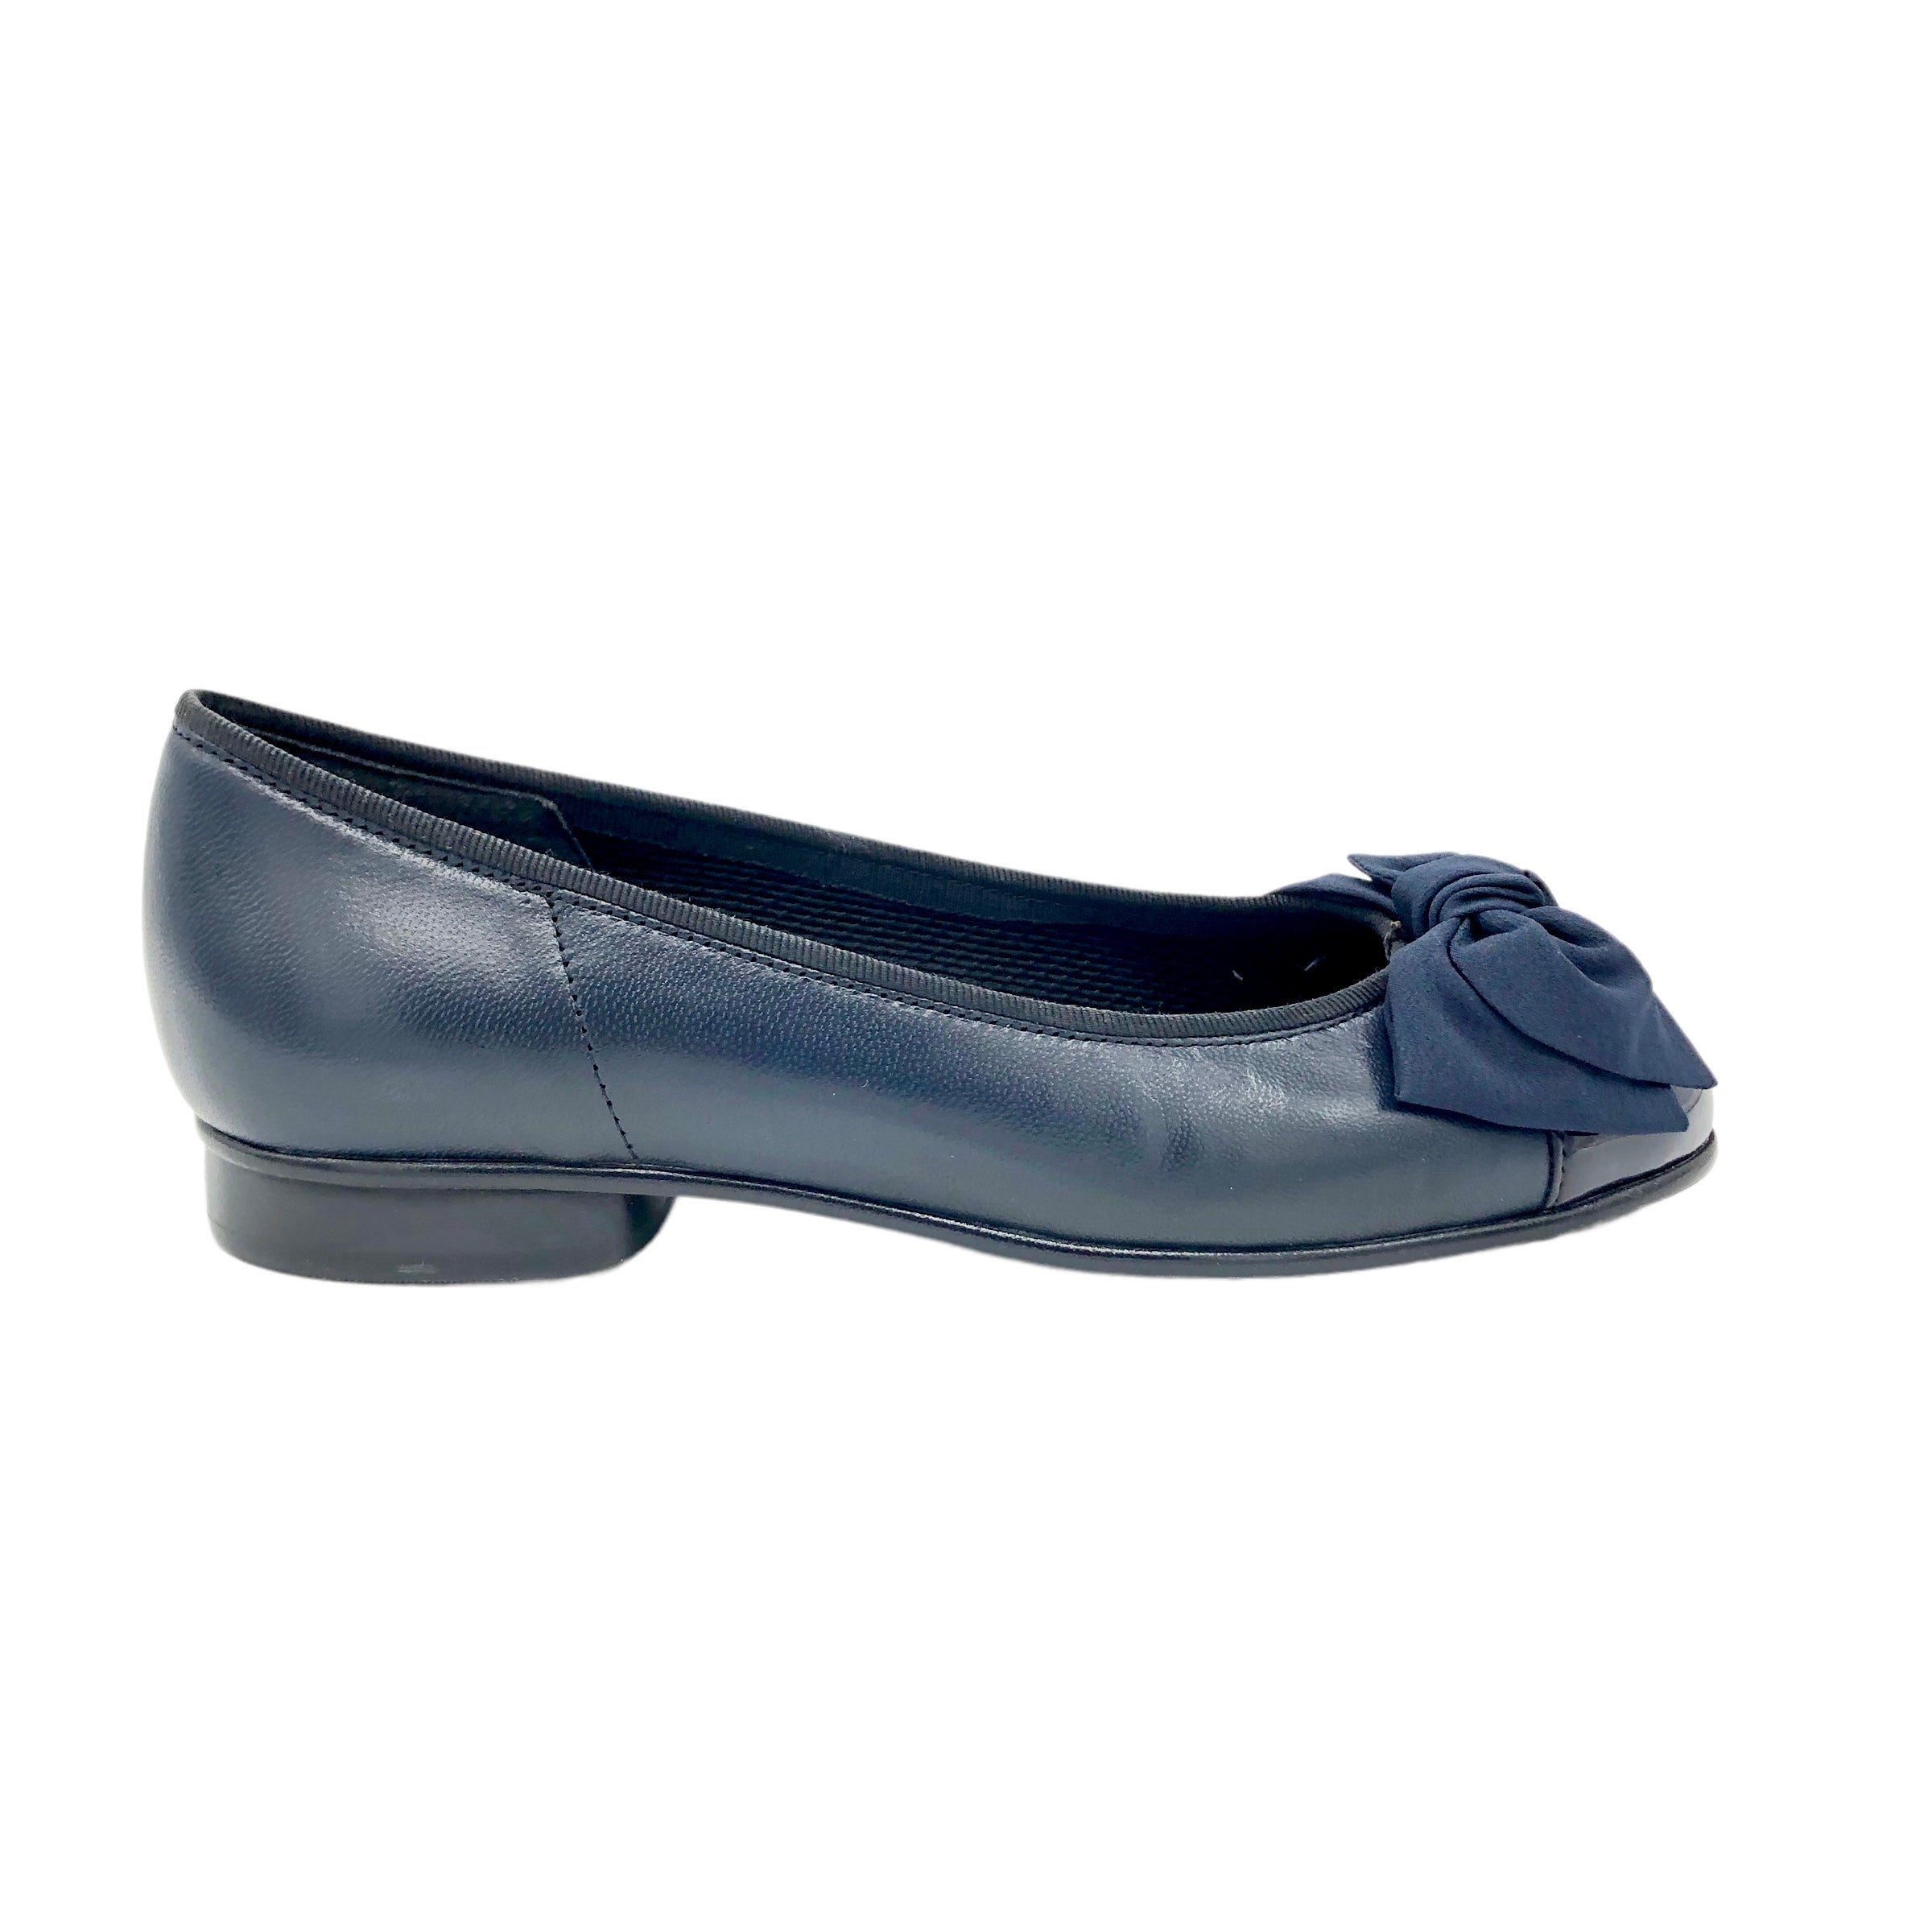 Samenhangend dwaas calorie Gabor Amy 05.106 Navy blue leather ballet pumps with patent leather toe –  Arnouts Shoes